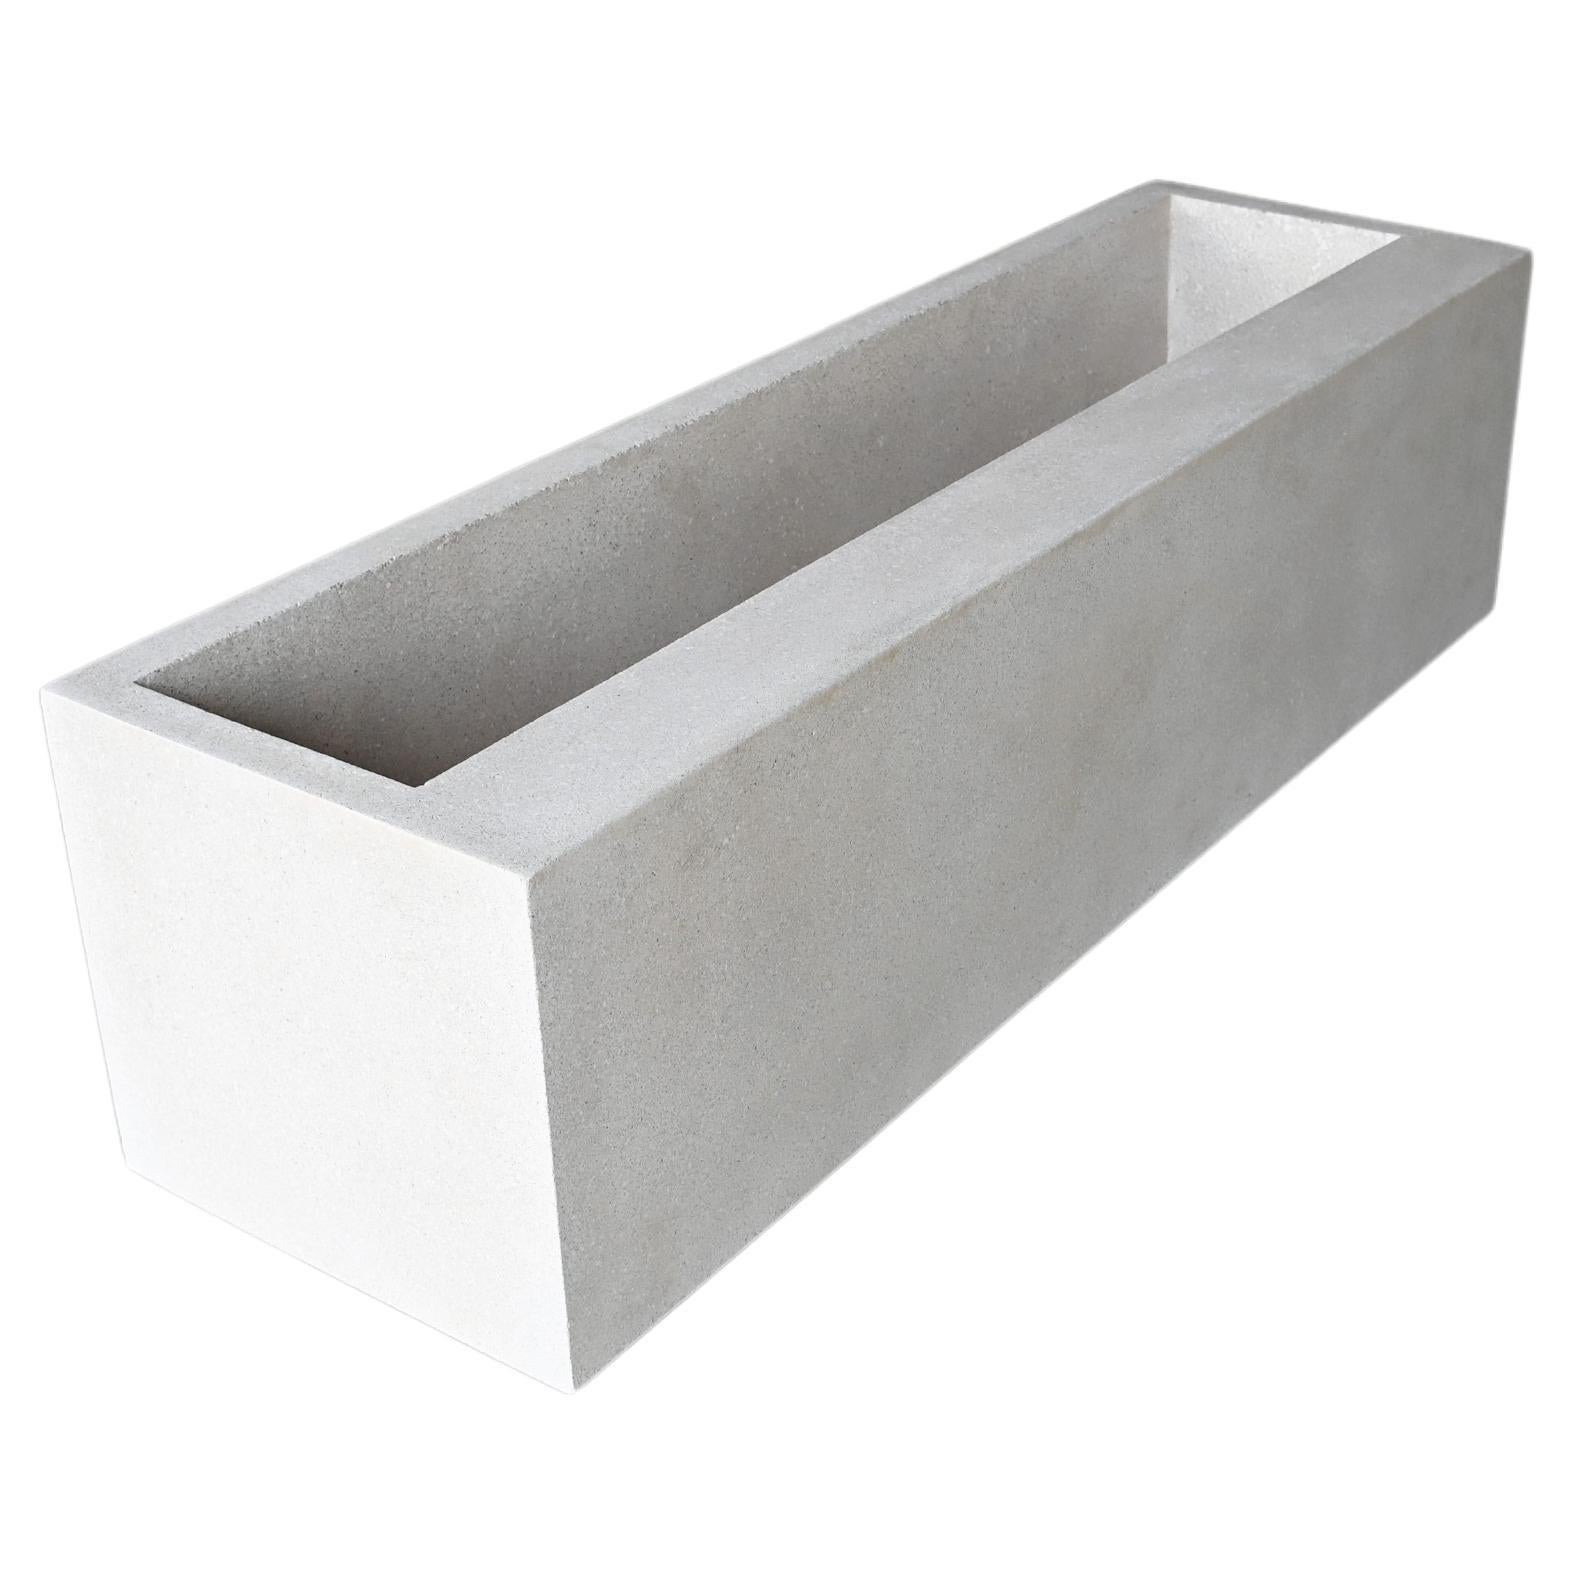 Cast Resin 'Terrace' Planter, Aged Stone Finish by Zachary A. Design For Sale